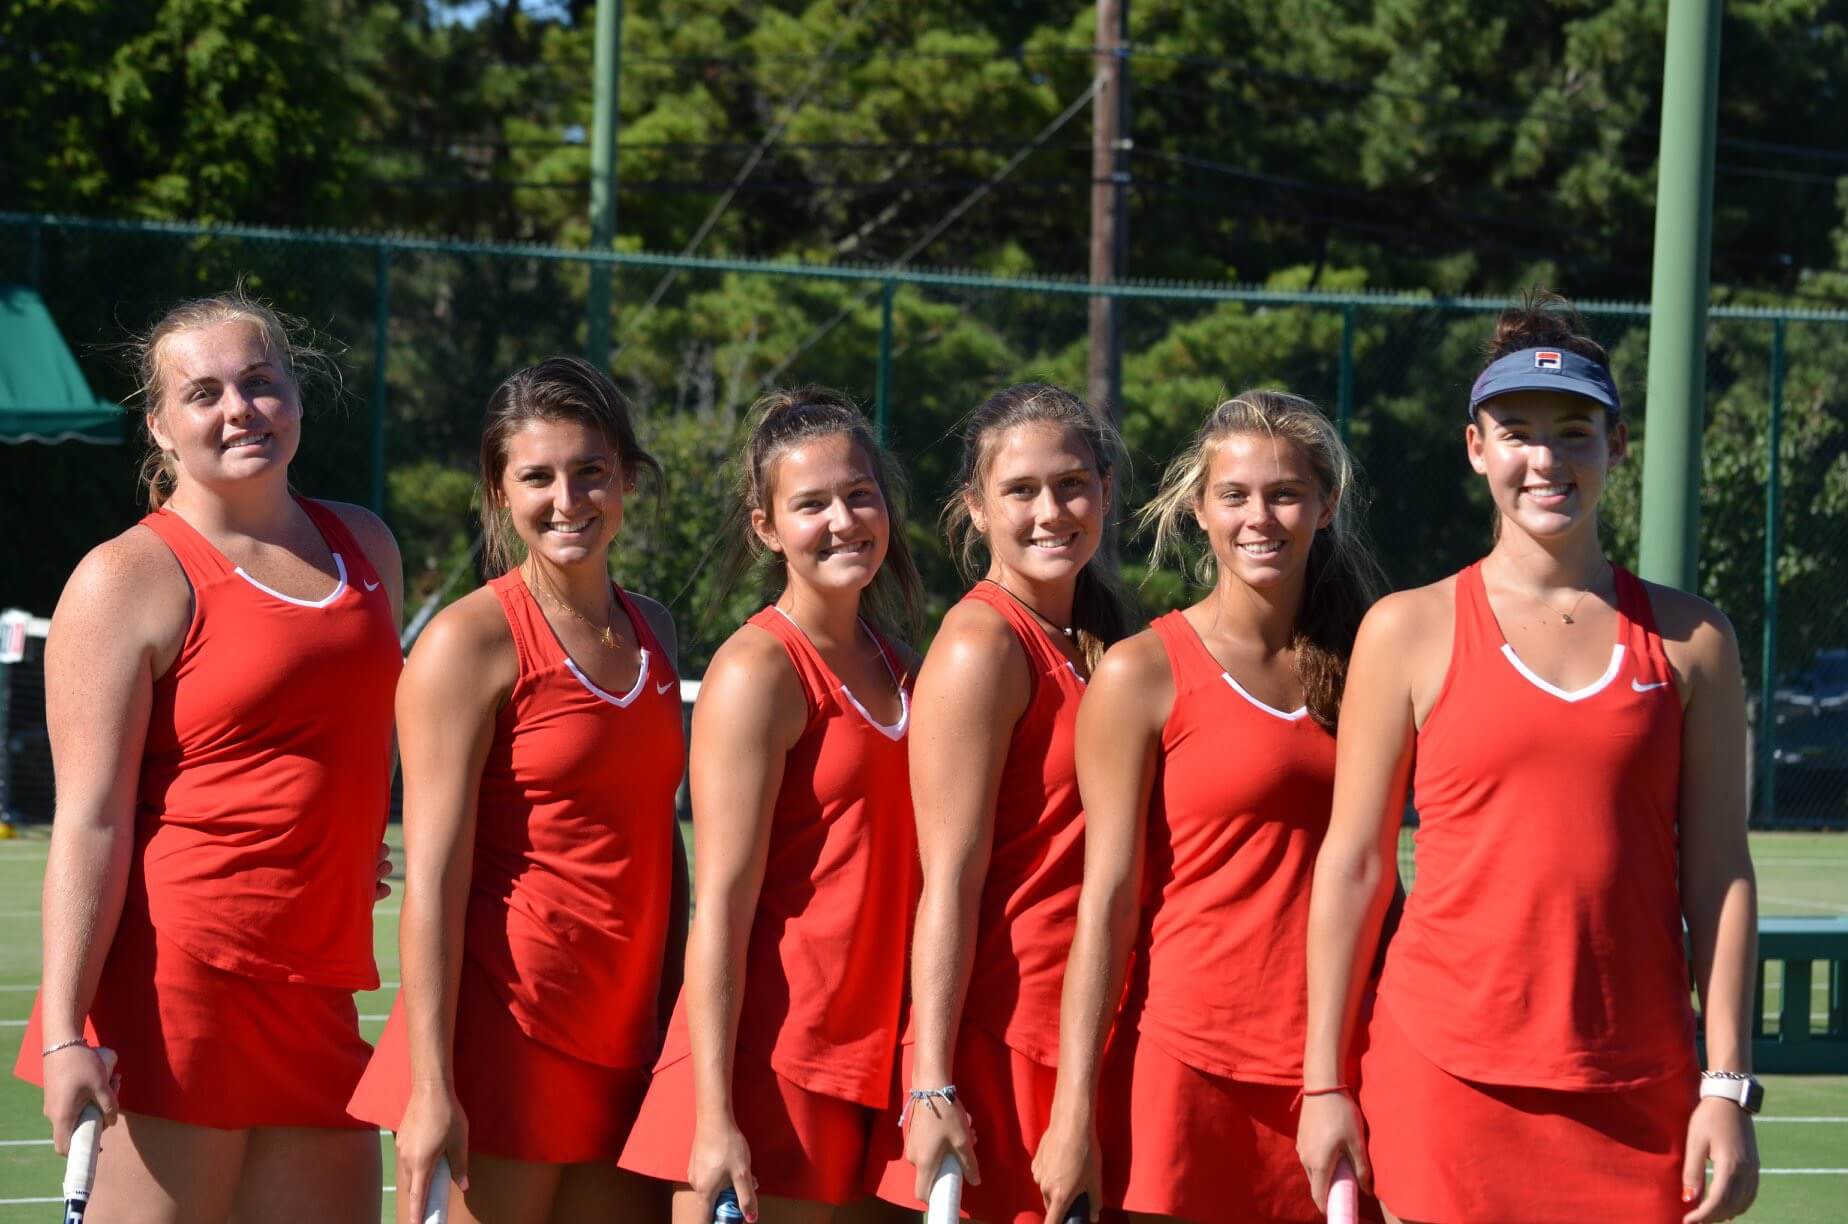 Ocean City girls tennis captains pose for a picture at the Ocean City High School tennis courts. From left to right: Cynthia Brown